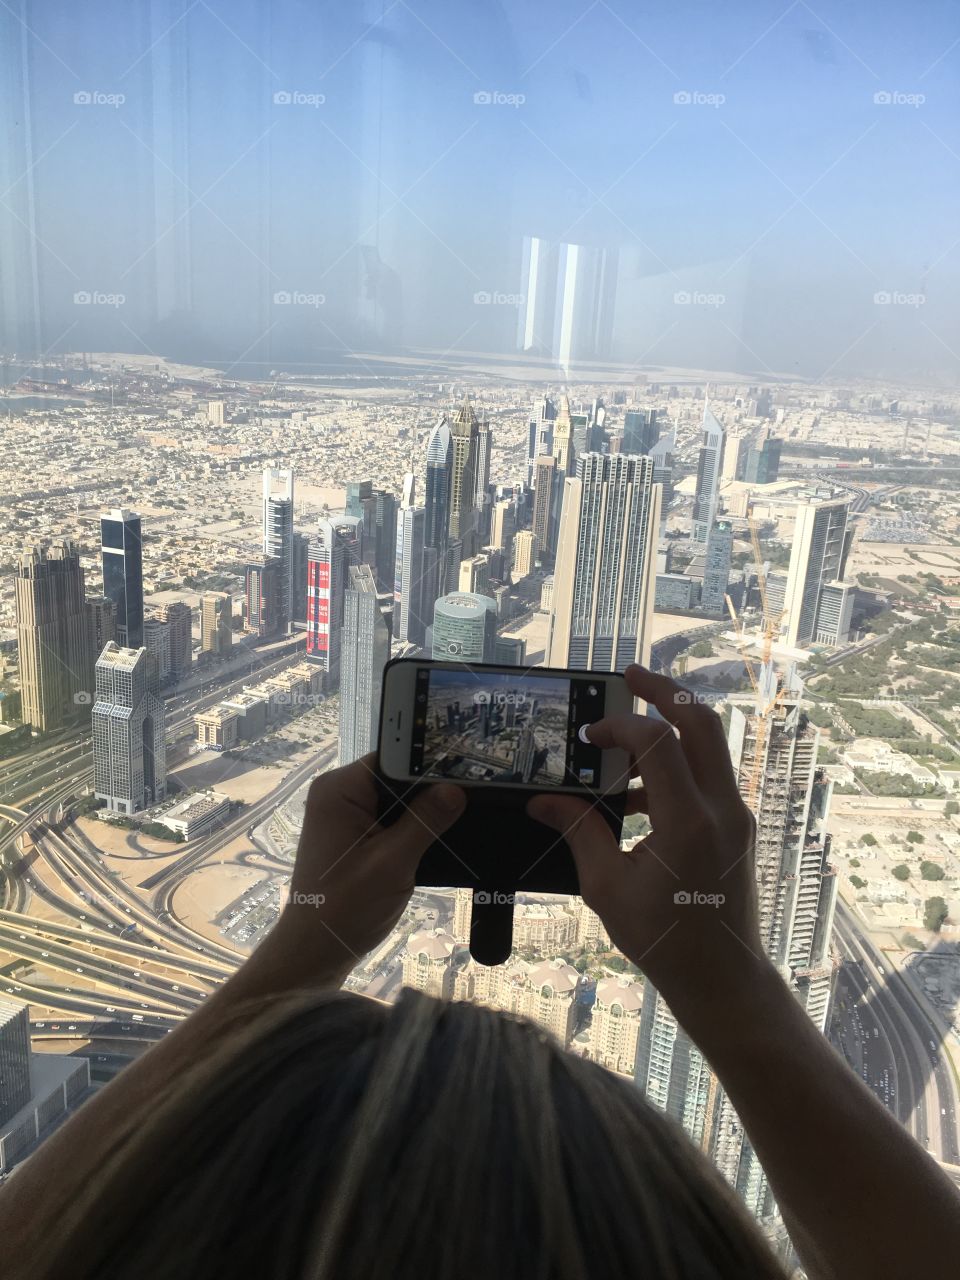 Taking pictures from 124 floor in Burj Khalifa 